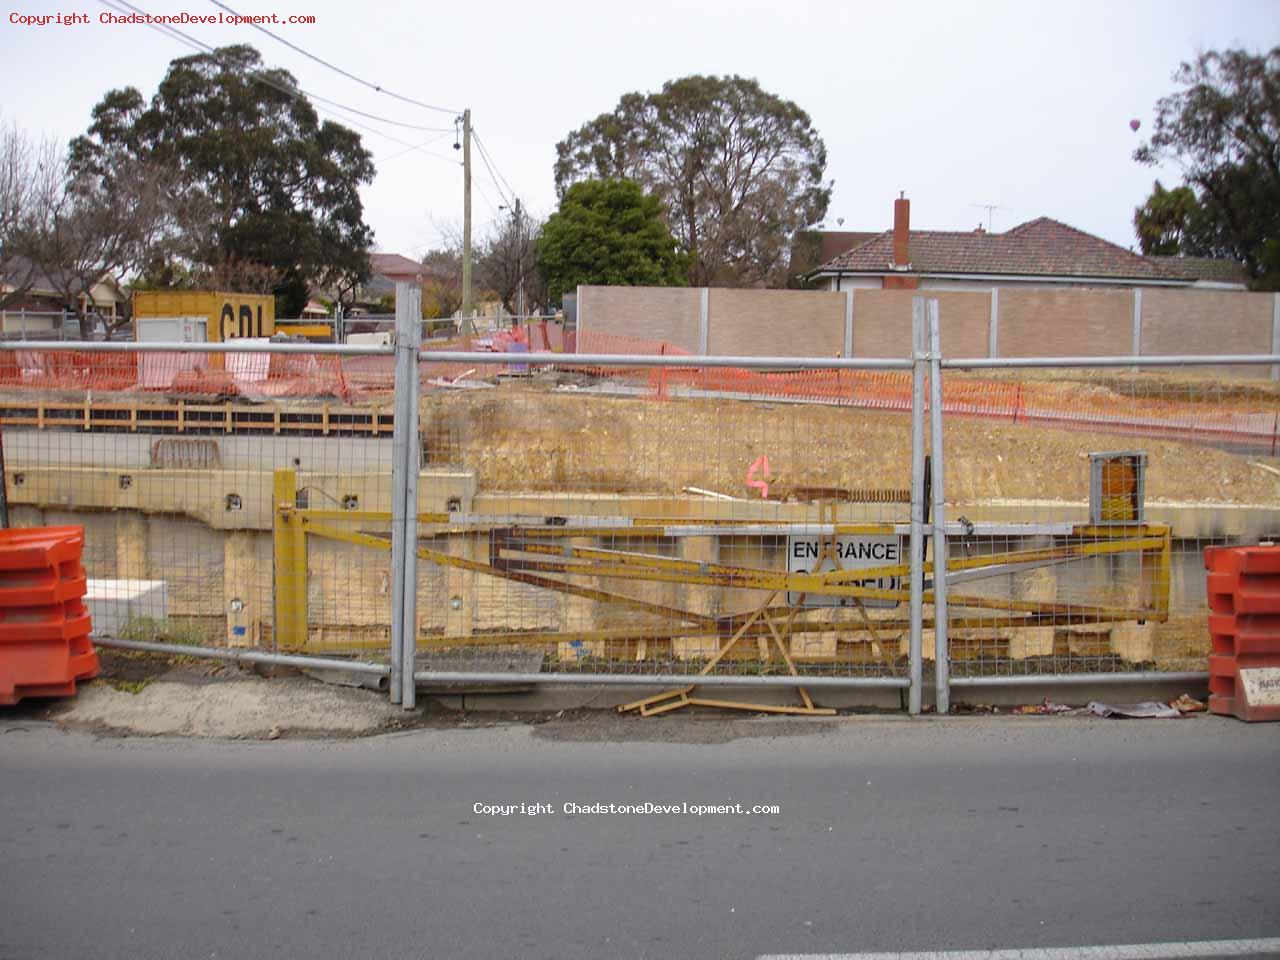 Only fencing stops you from falling over the edge! - Chadstone Development Discussions